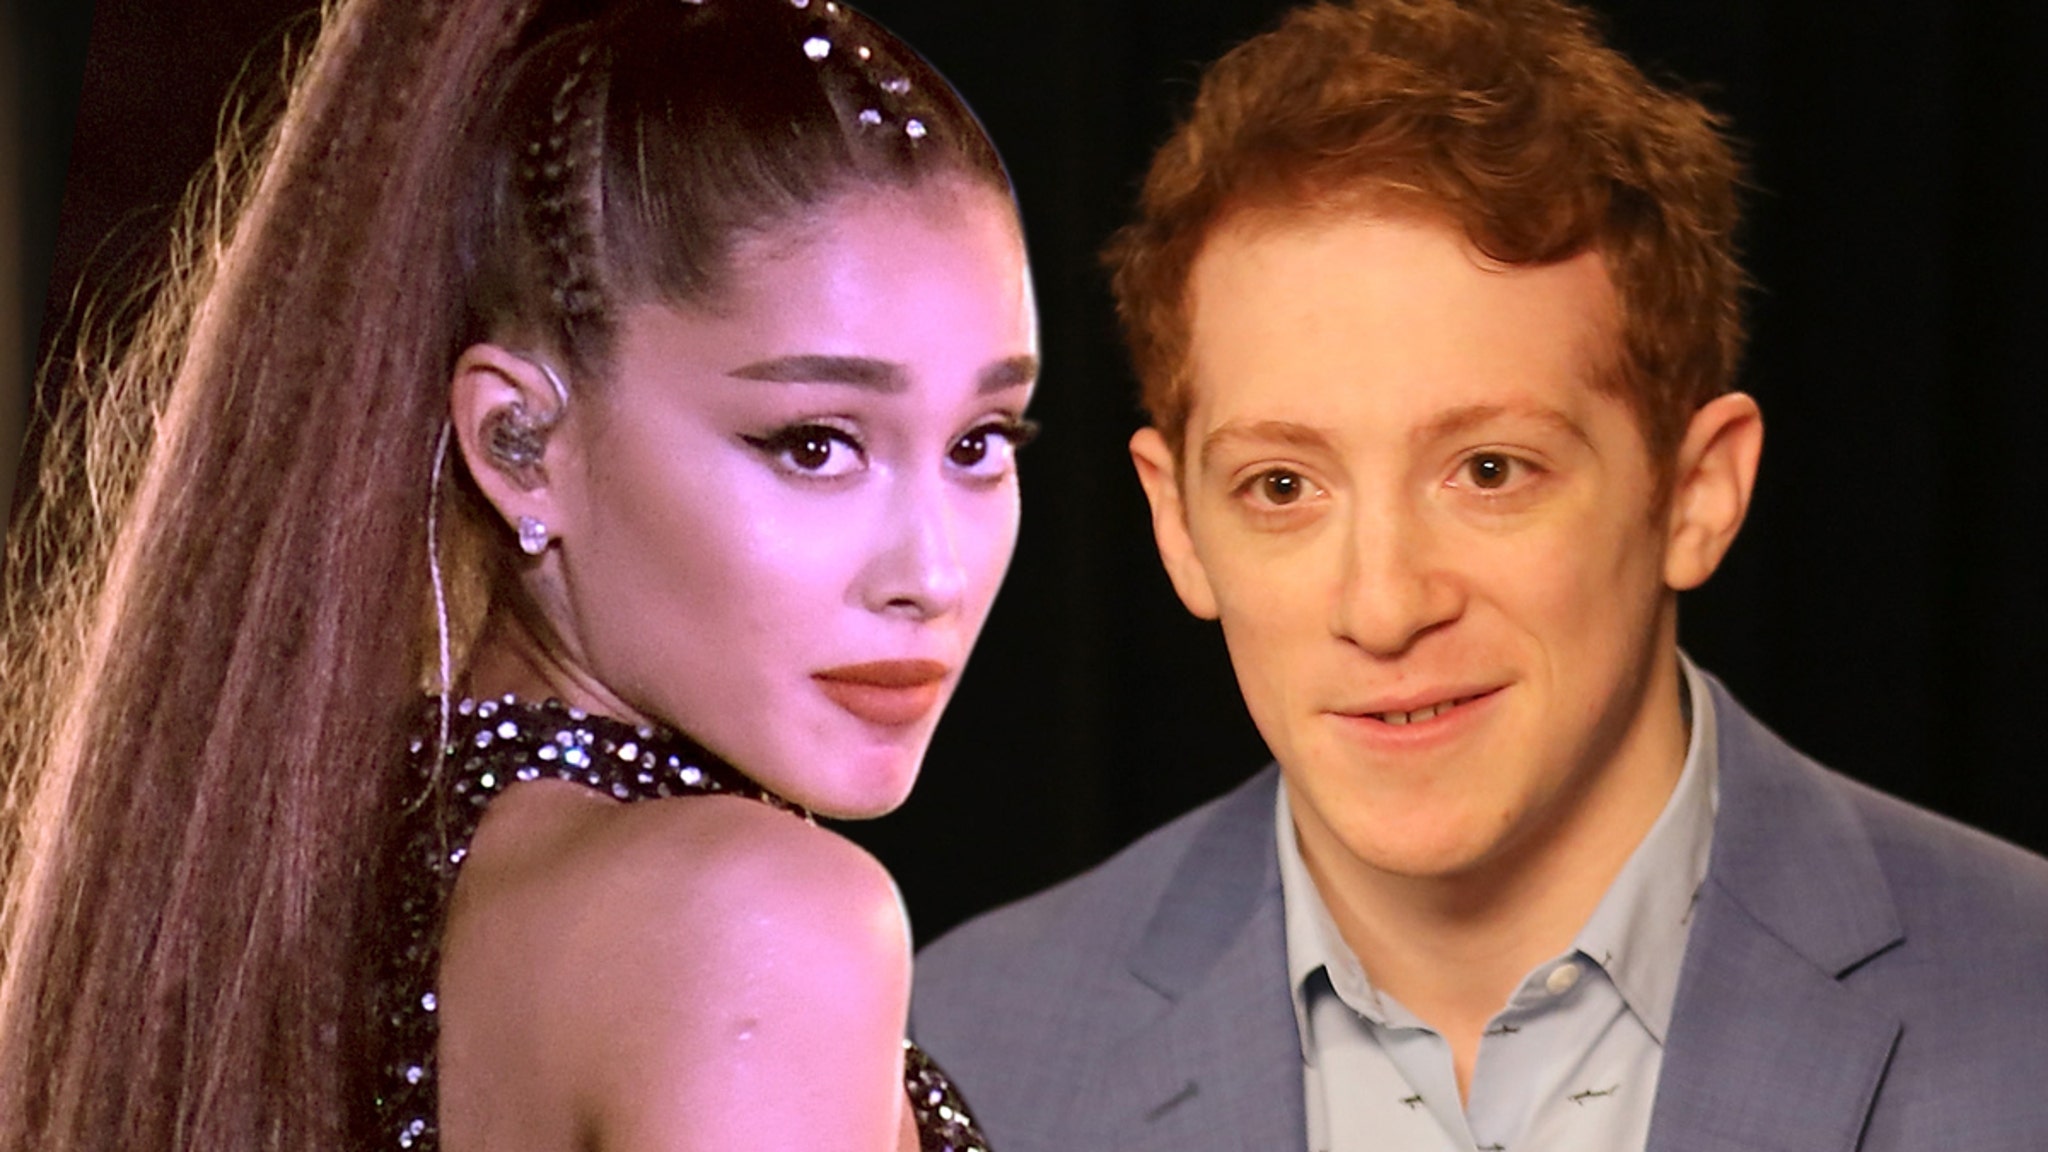 Ariana Grande Giving BF Ethan Slater Space To Work Out Issues With Estranged Wife